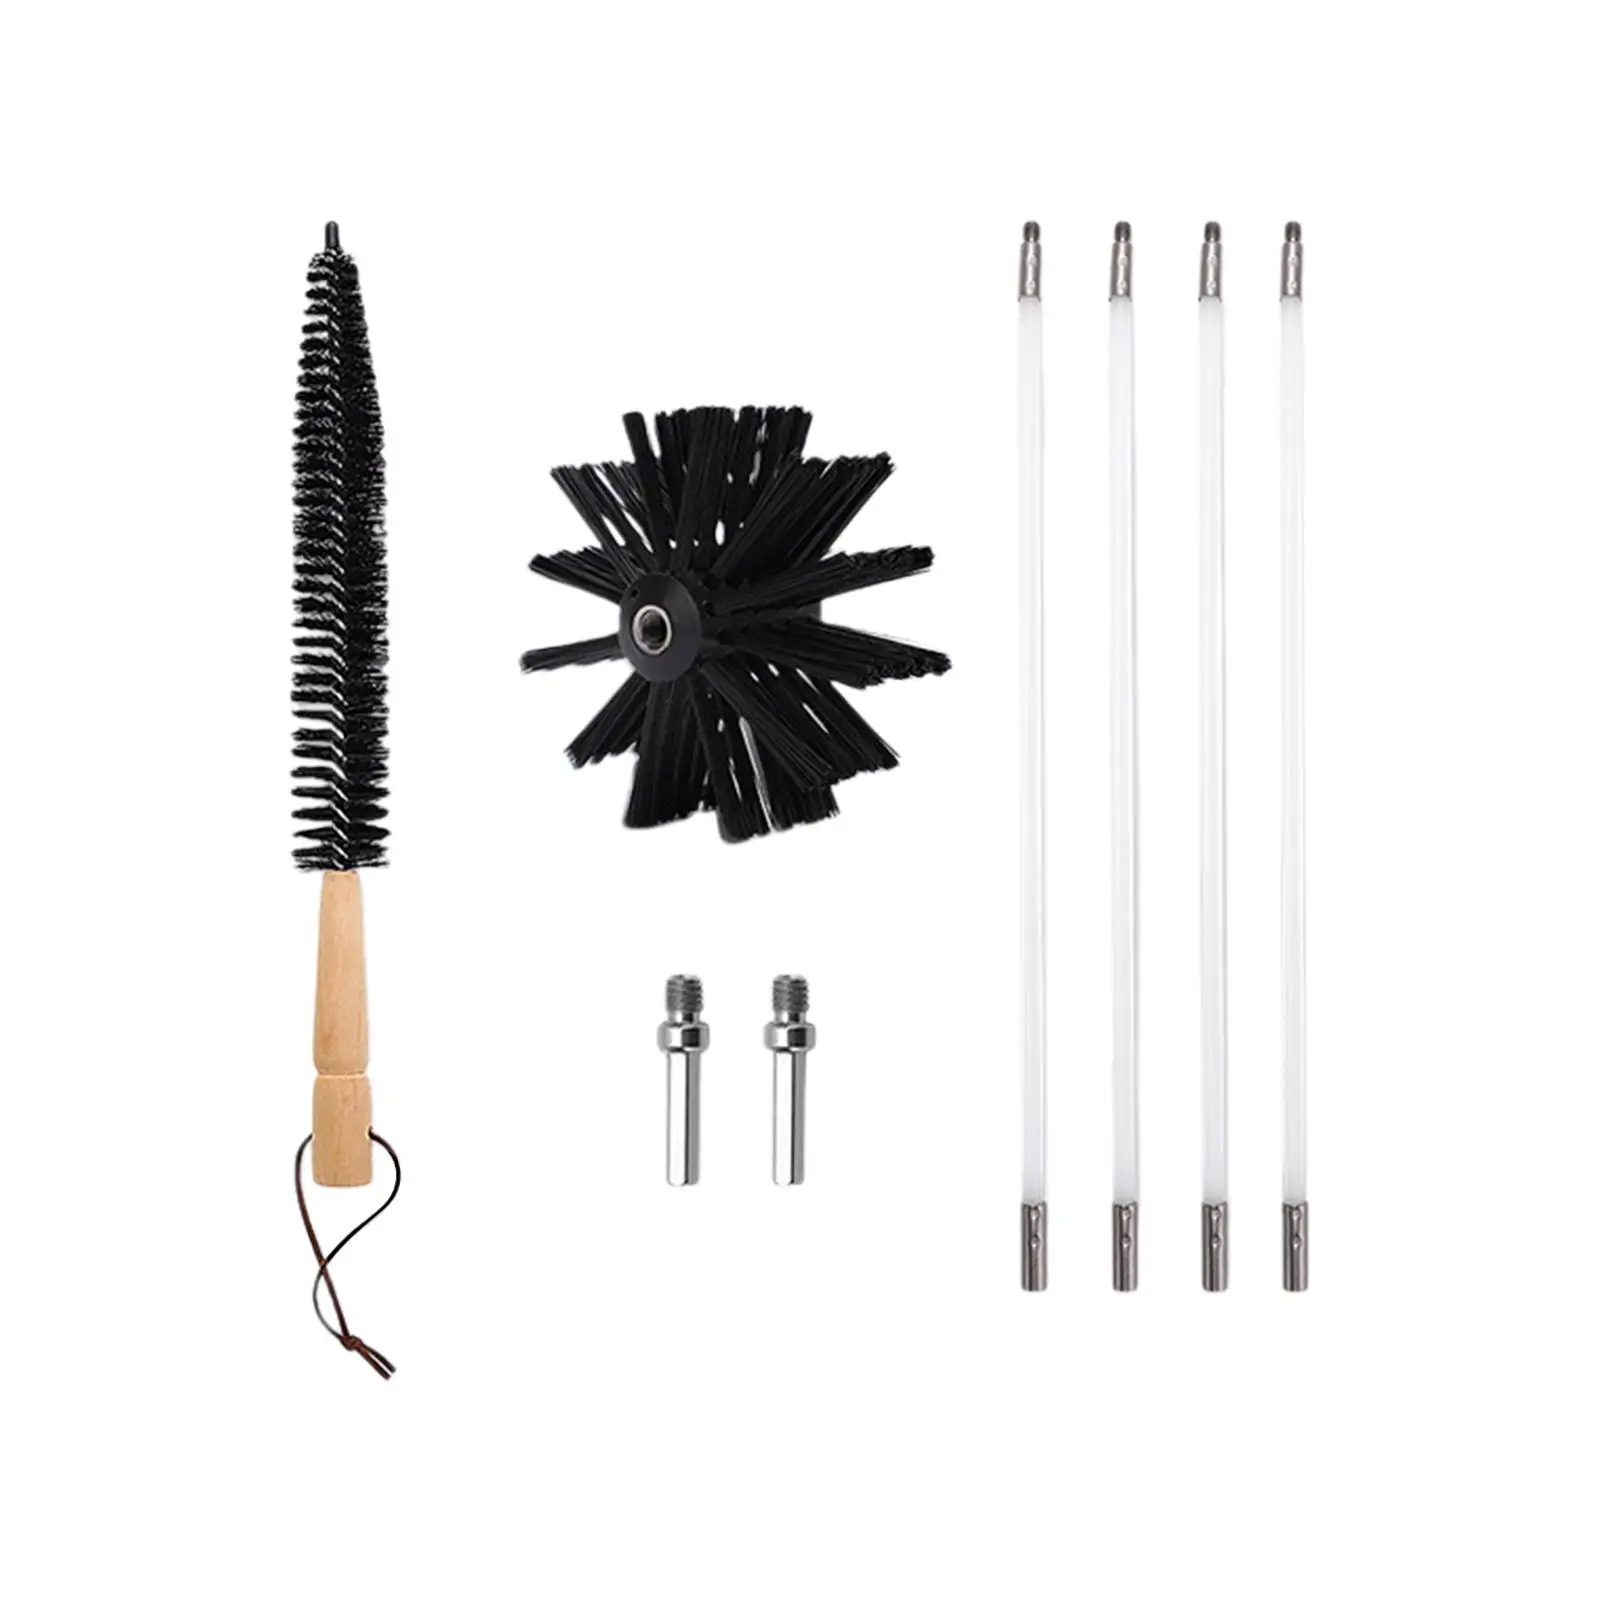 Dry Duct Cleaning Kit Long Handle Flexible Rod Professional with Brush Head and Dryer Lint Brush, Bendable Rods Accessories